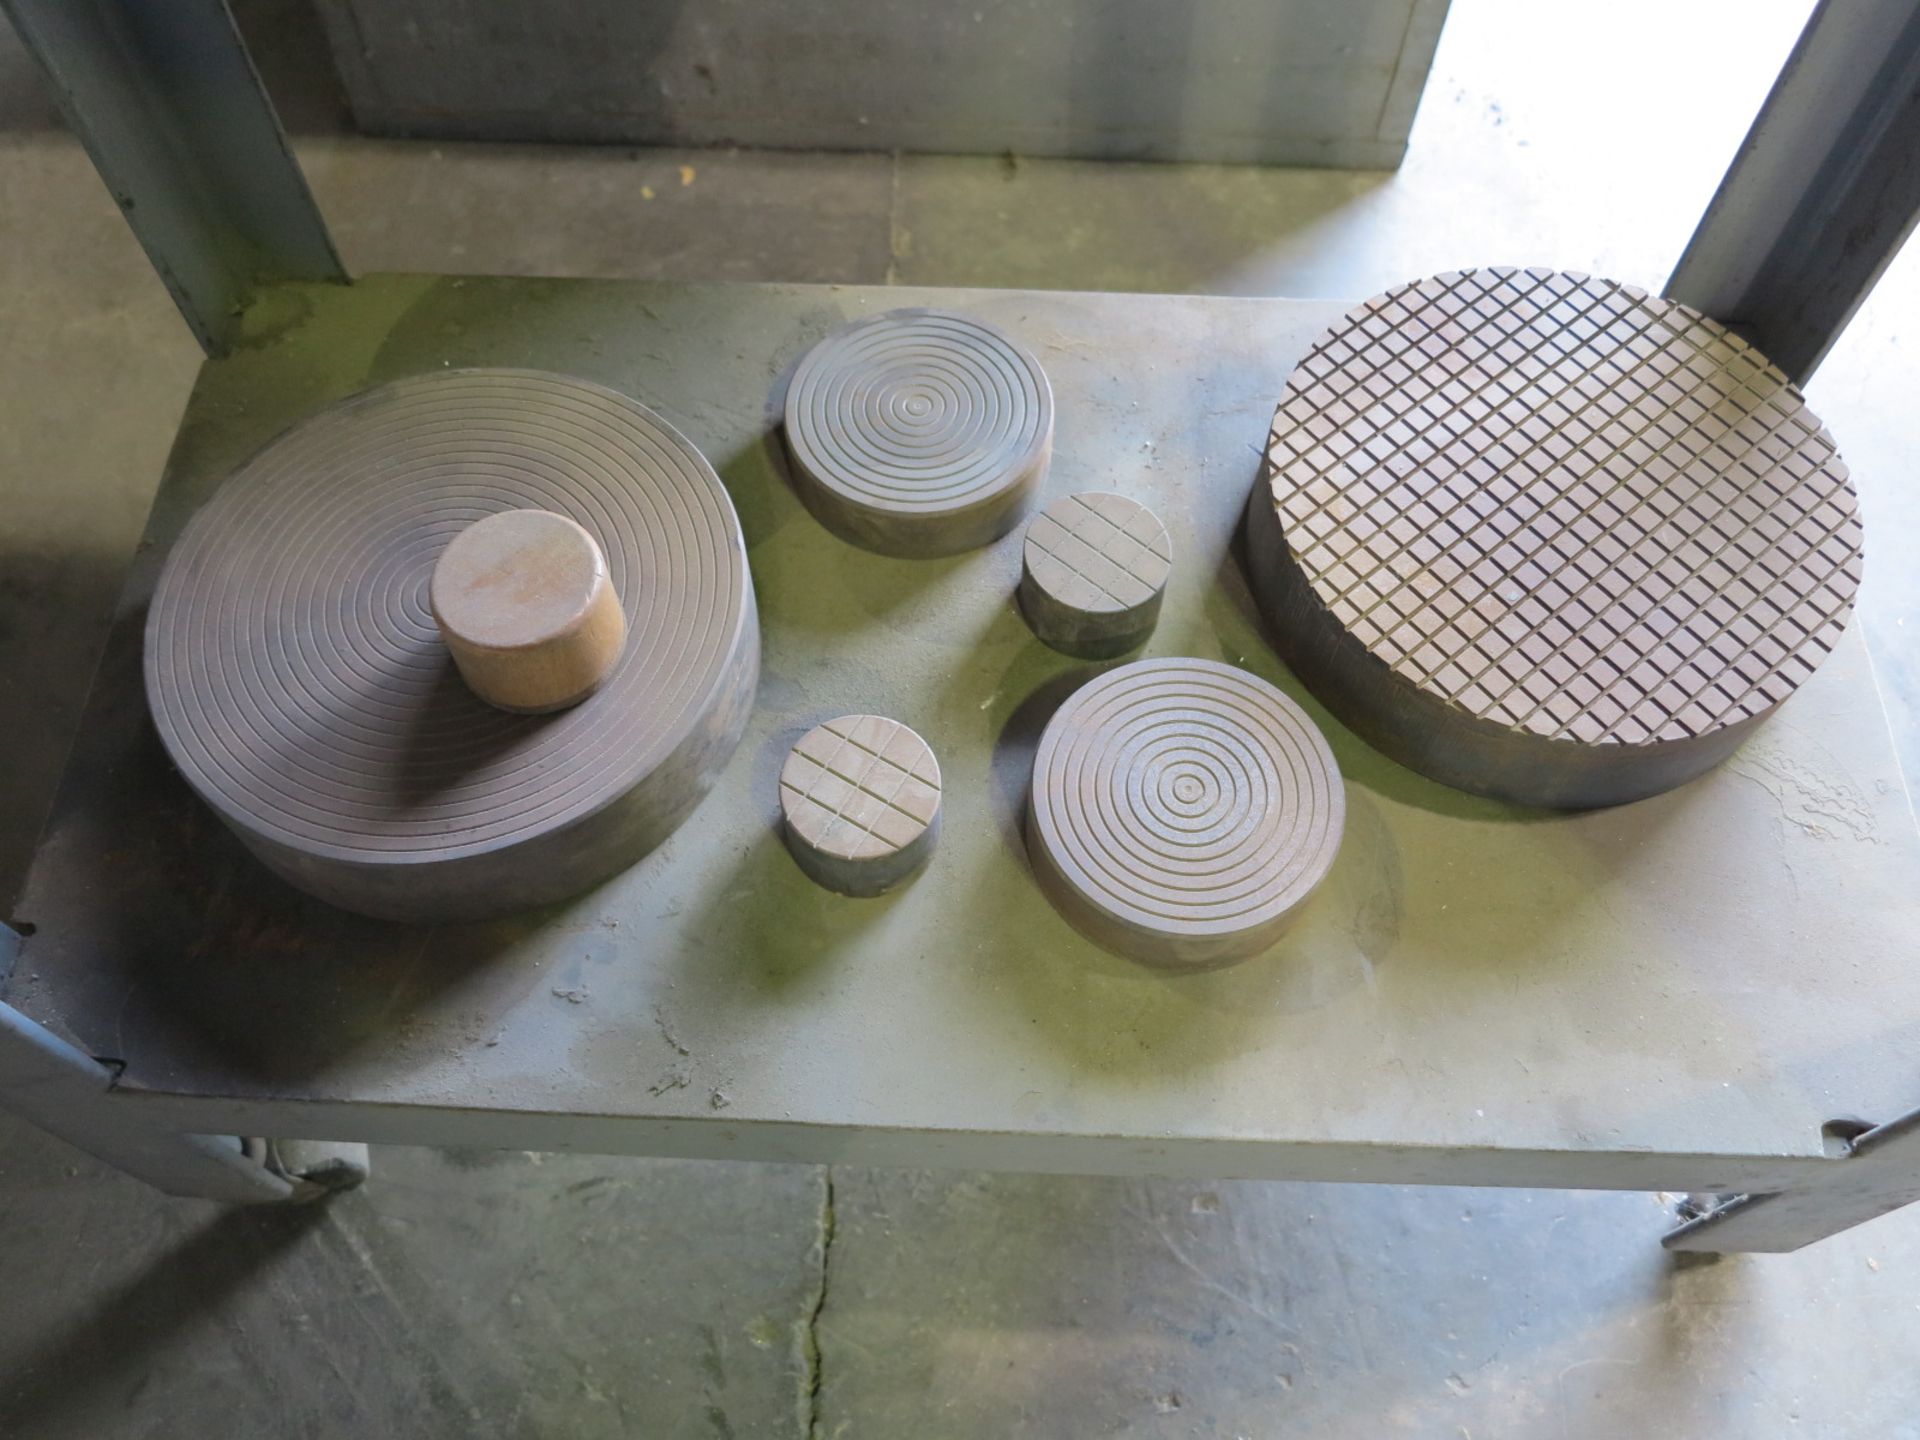 LOT - LAPPING PLATES AND COLLECTION OF LAPPING COMPOUNDS, W/ CART - Image 2 of 3